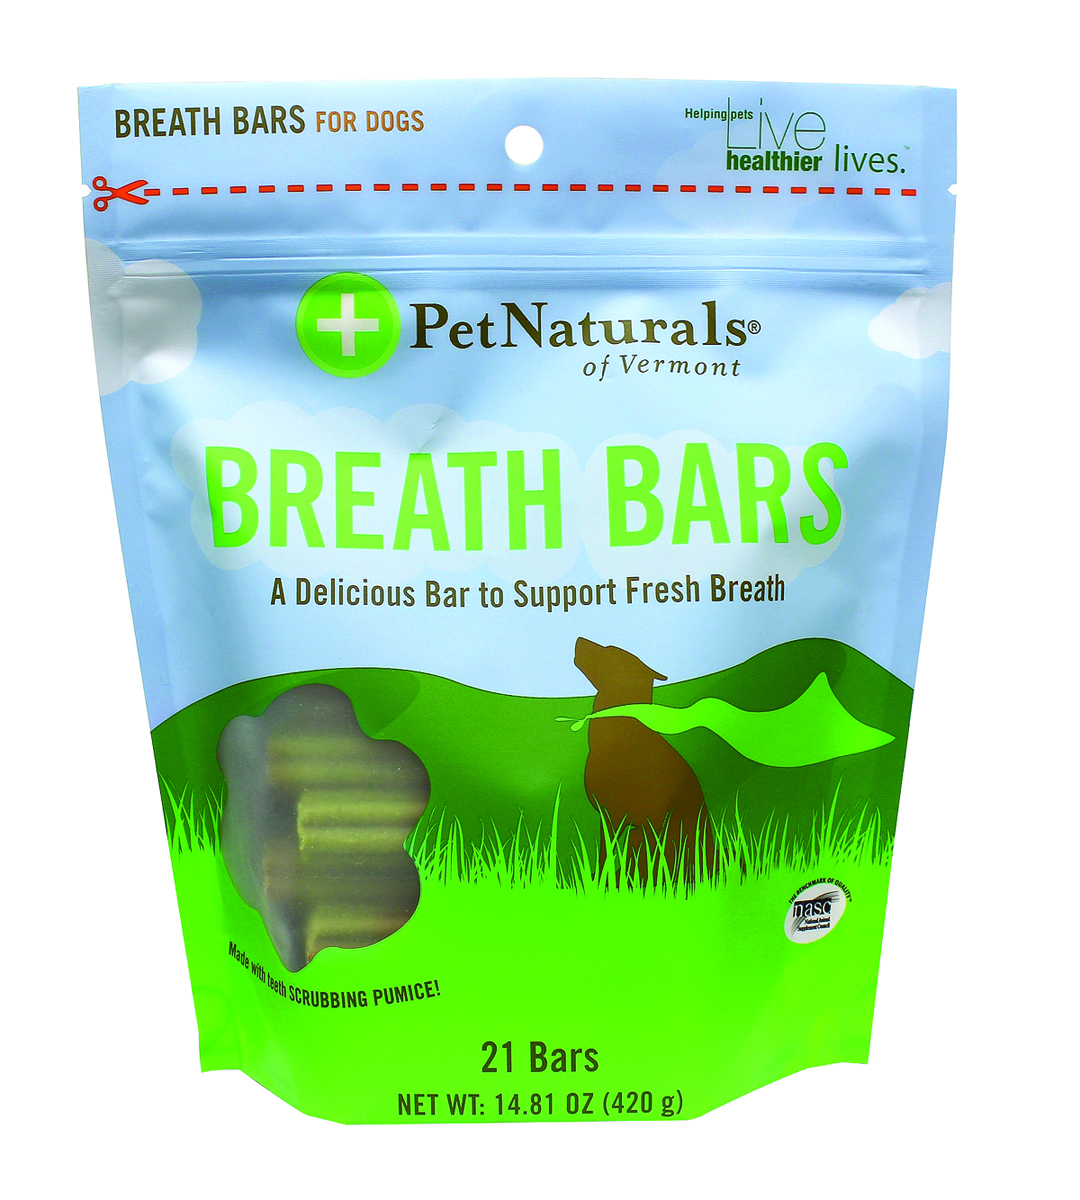 BREATH BARS FOR DOGS